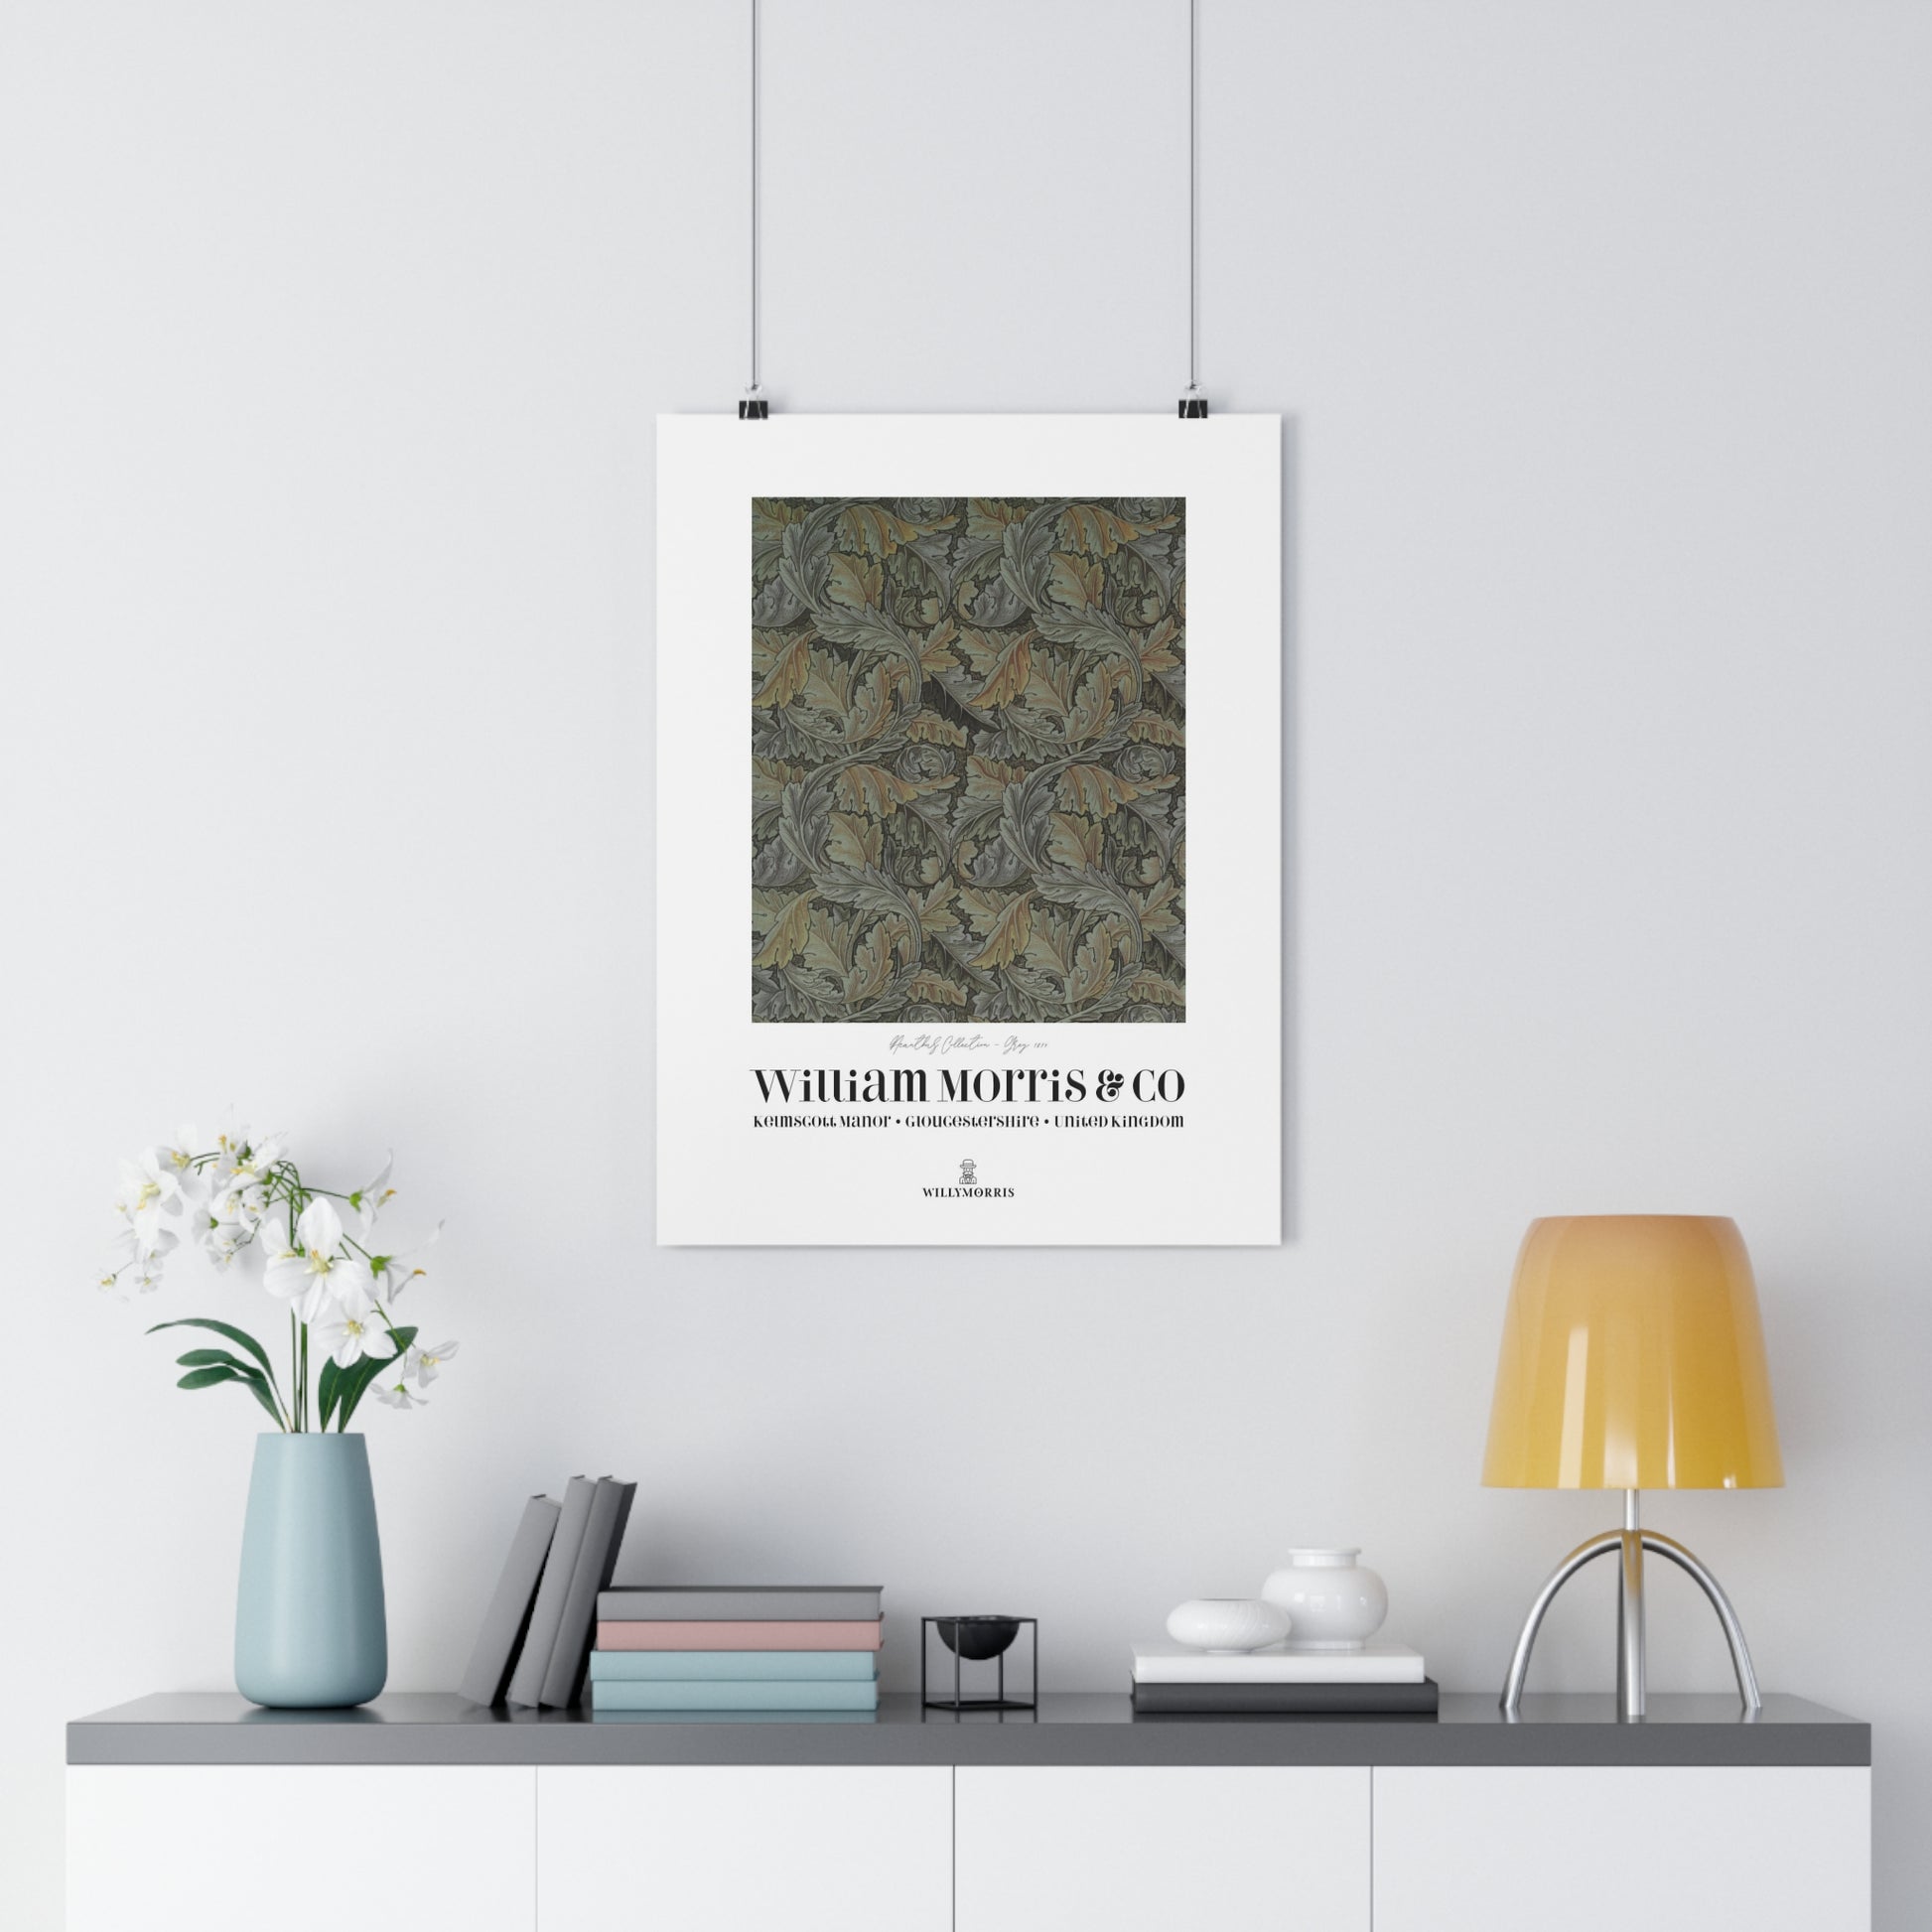 william-morris-co-giclee-art-print-acanthus-collection-grey-15